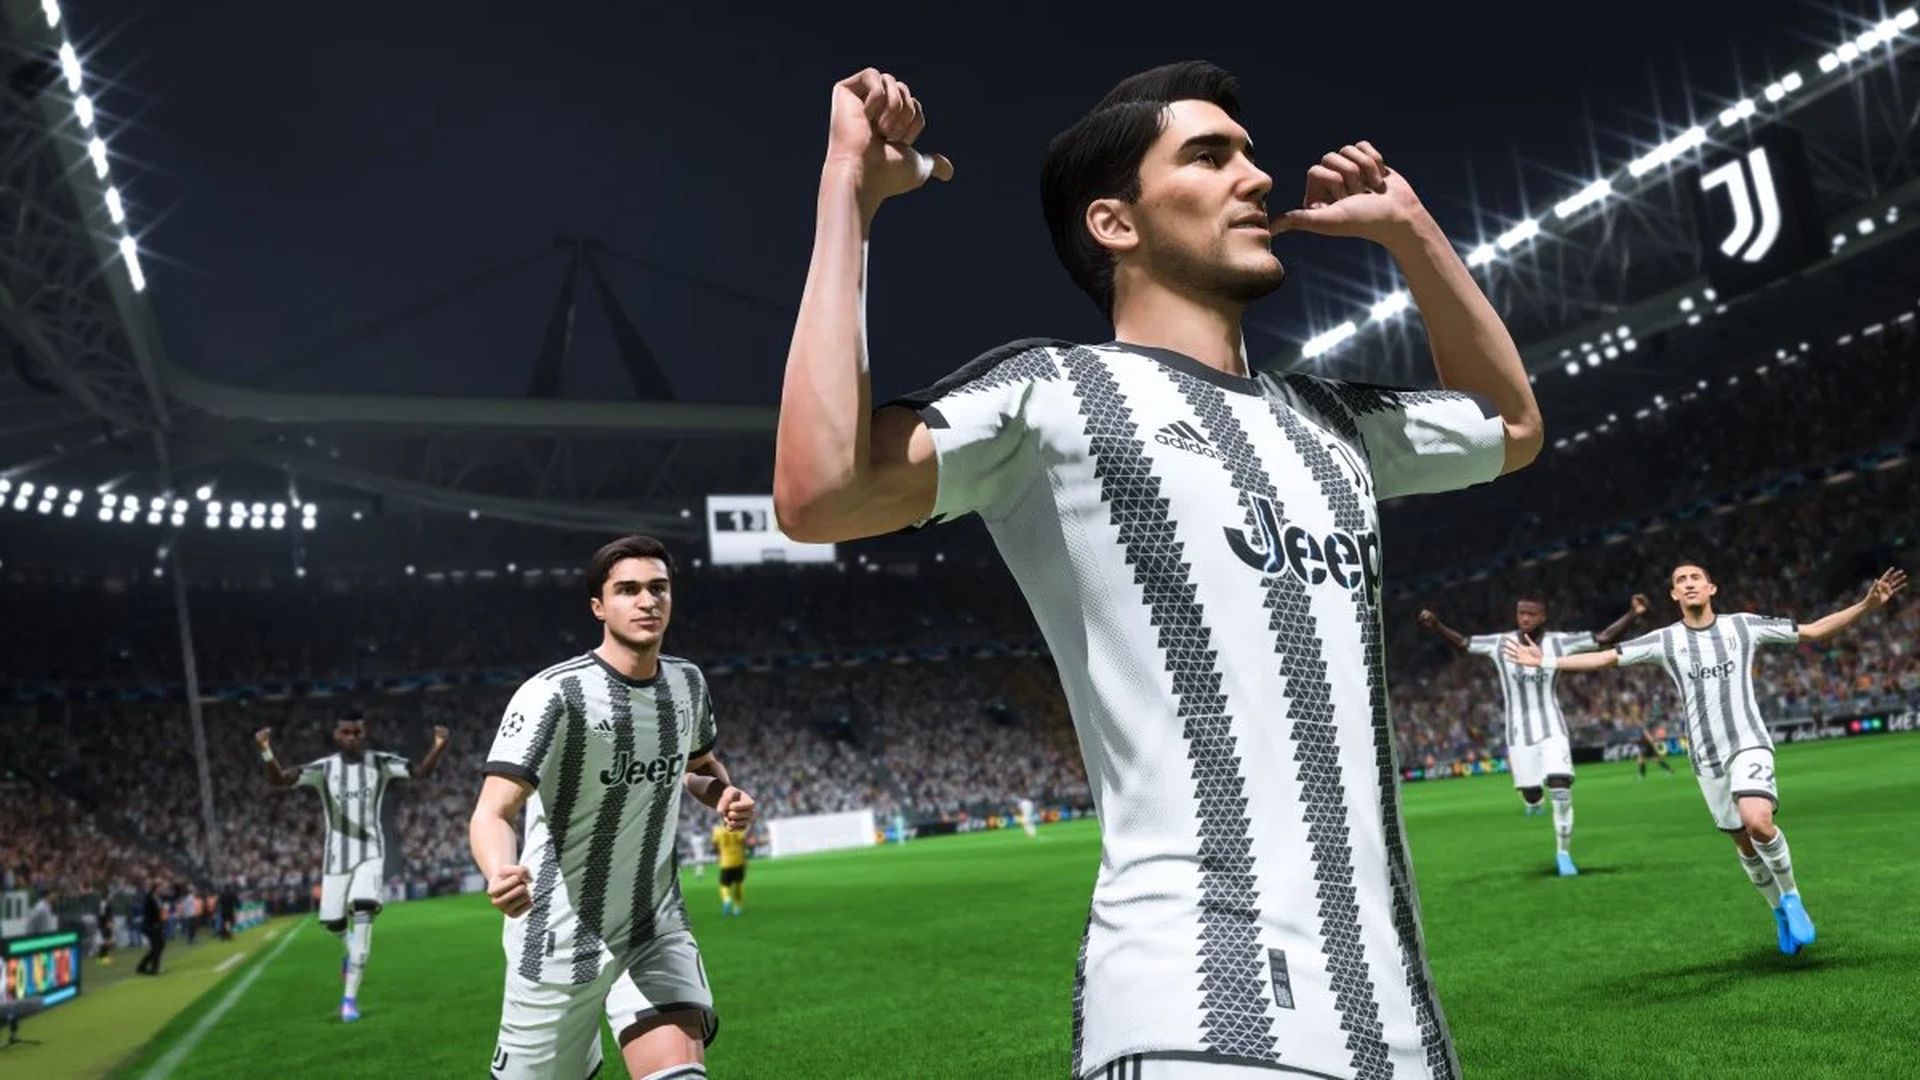 The latest FIFA 23 gameplay trailer from EA Sports provides a thorough look at gameplay and the enhanced features of the next FIFA game.